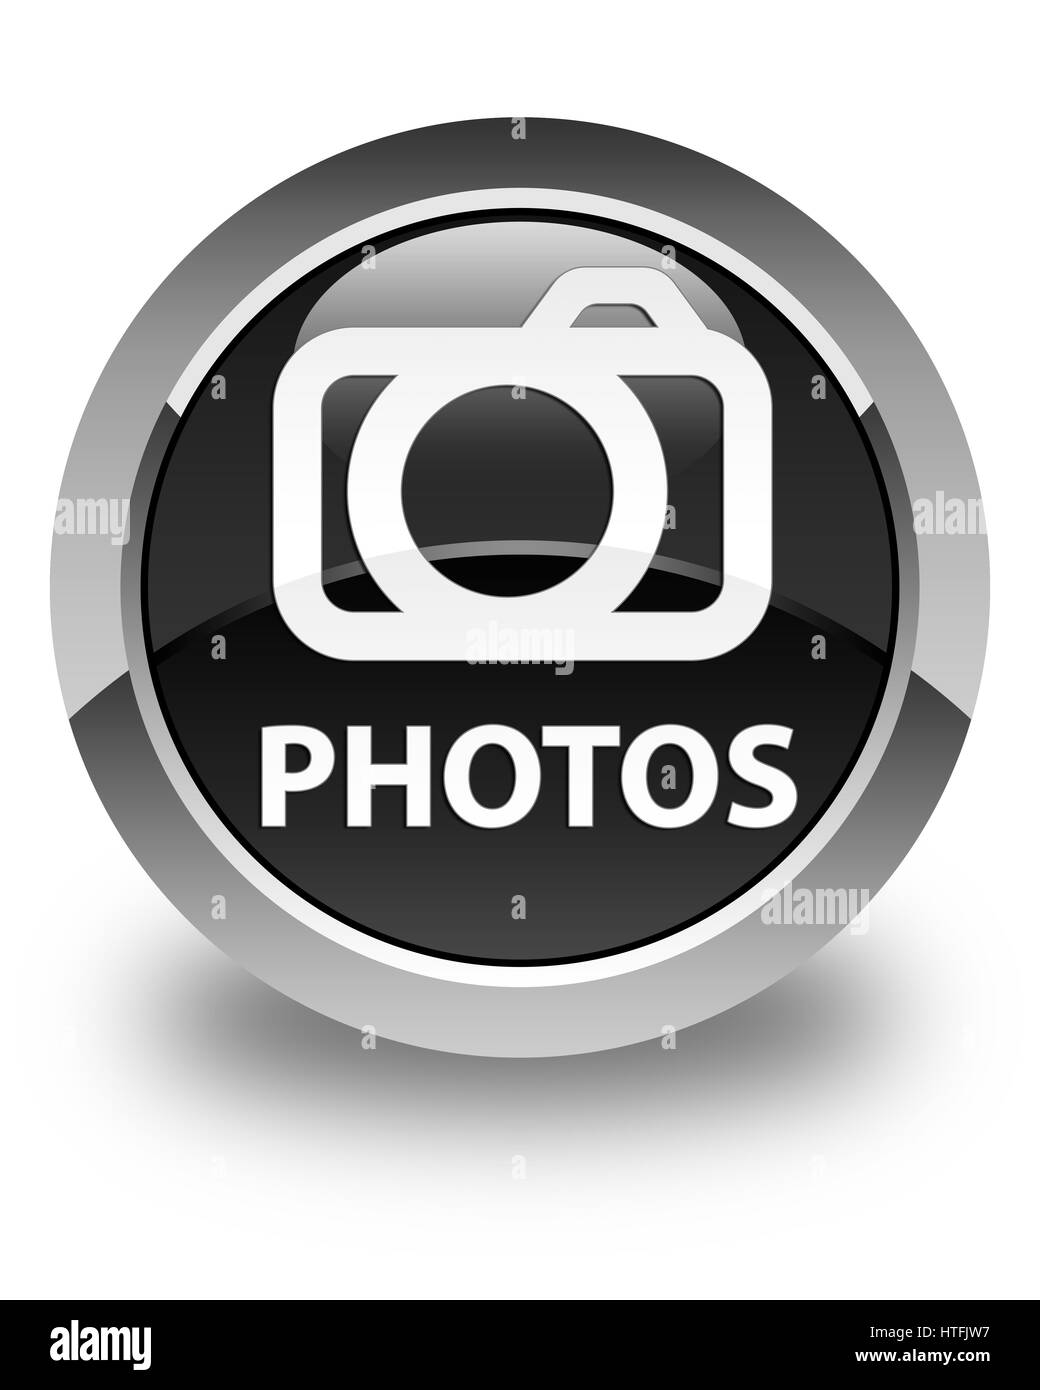 Photos (camera icon) isolated on glossy black round button abstract illustration Stock Photo